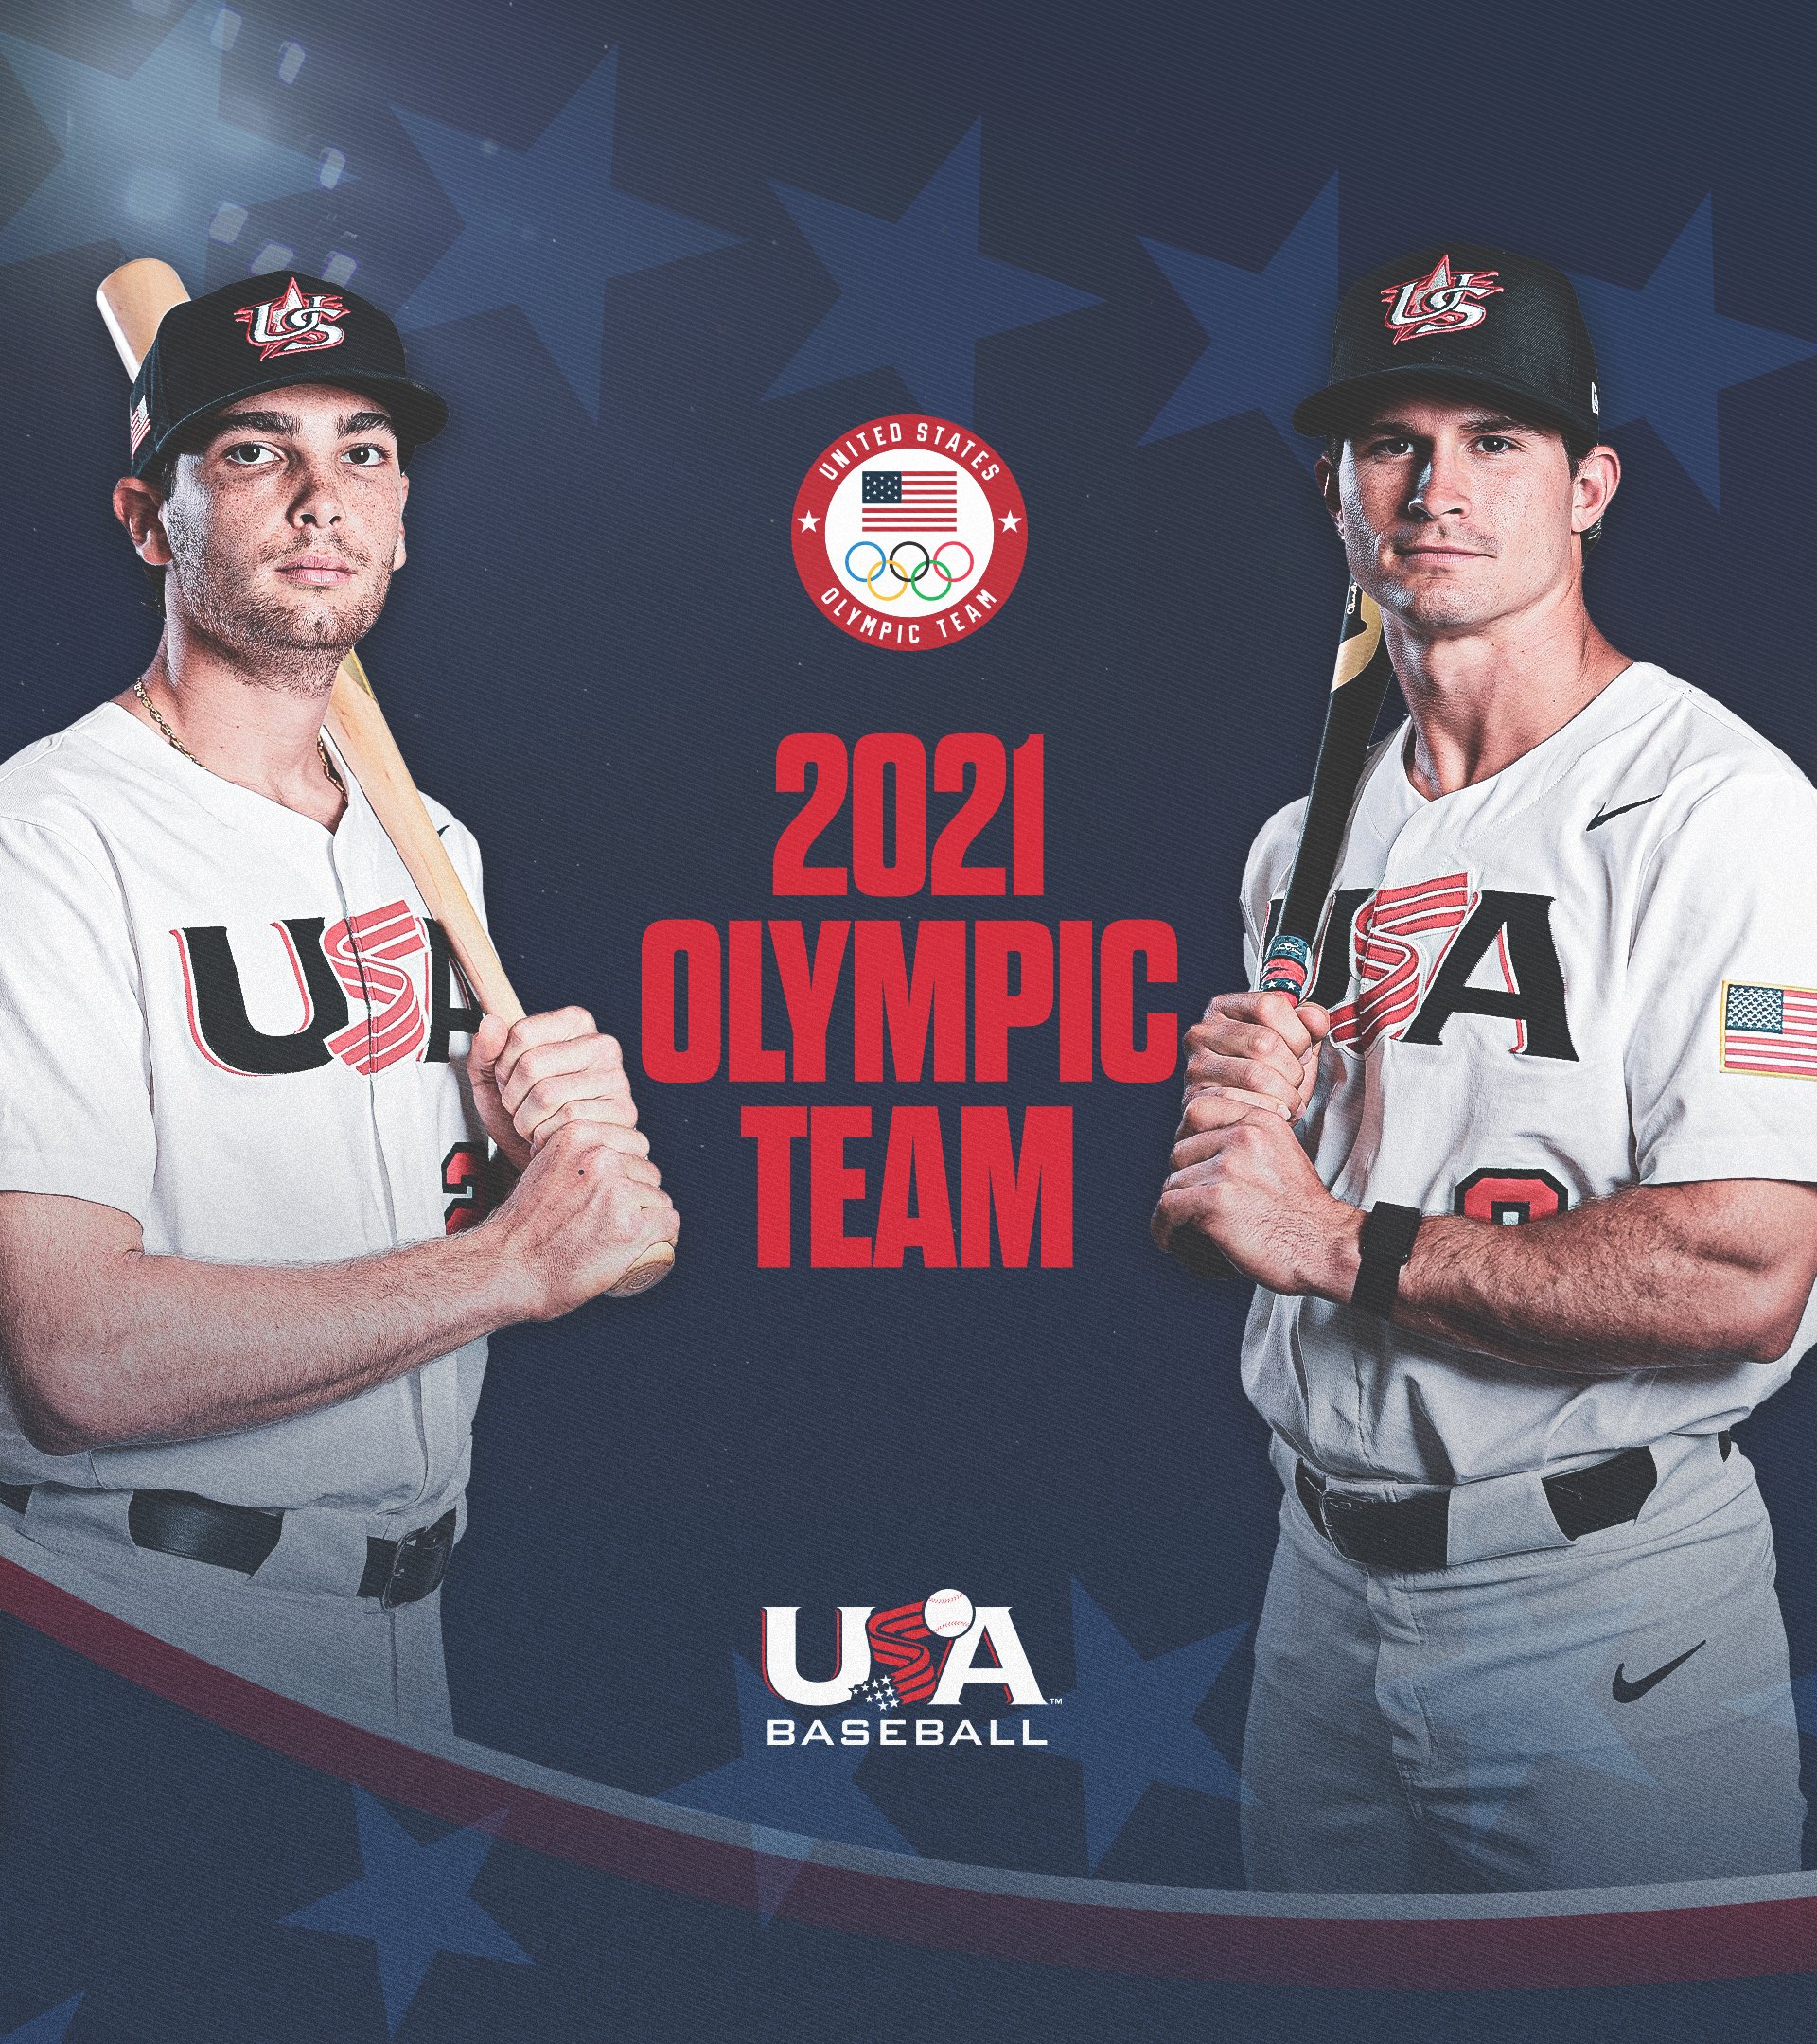 Usa Baseball The Team That Will Bring Home Olympic Gold Forglory See You In Tokyo T Co L9apiigxxk T Co 51lenyte85 Twitter